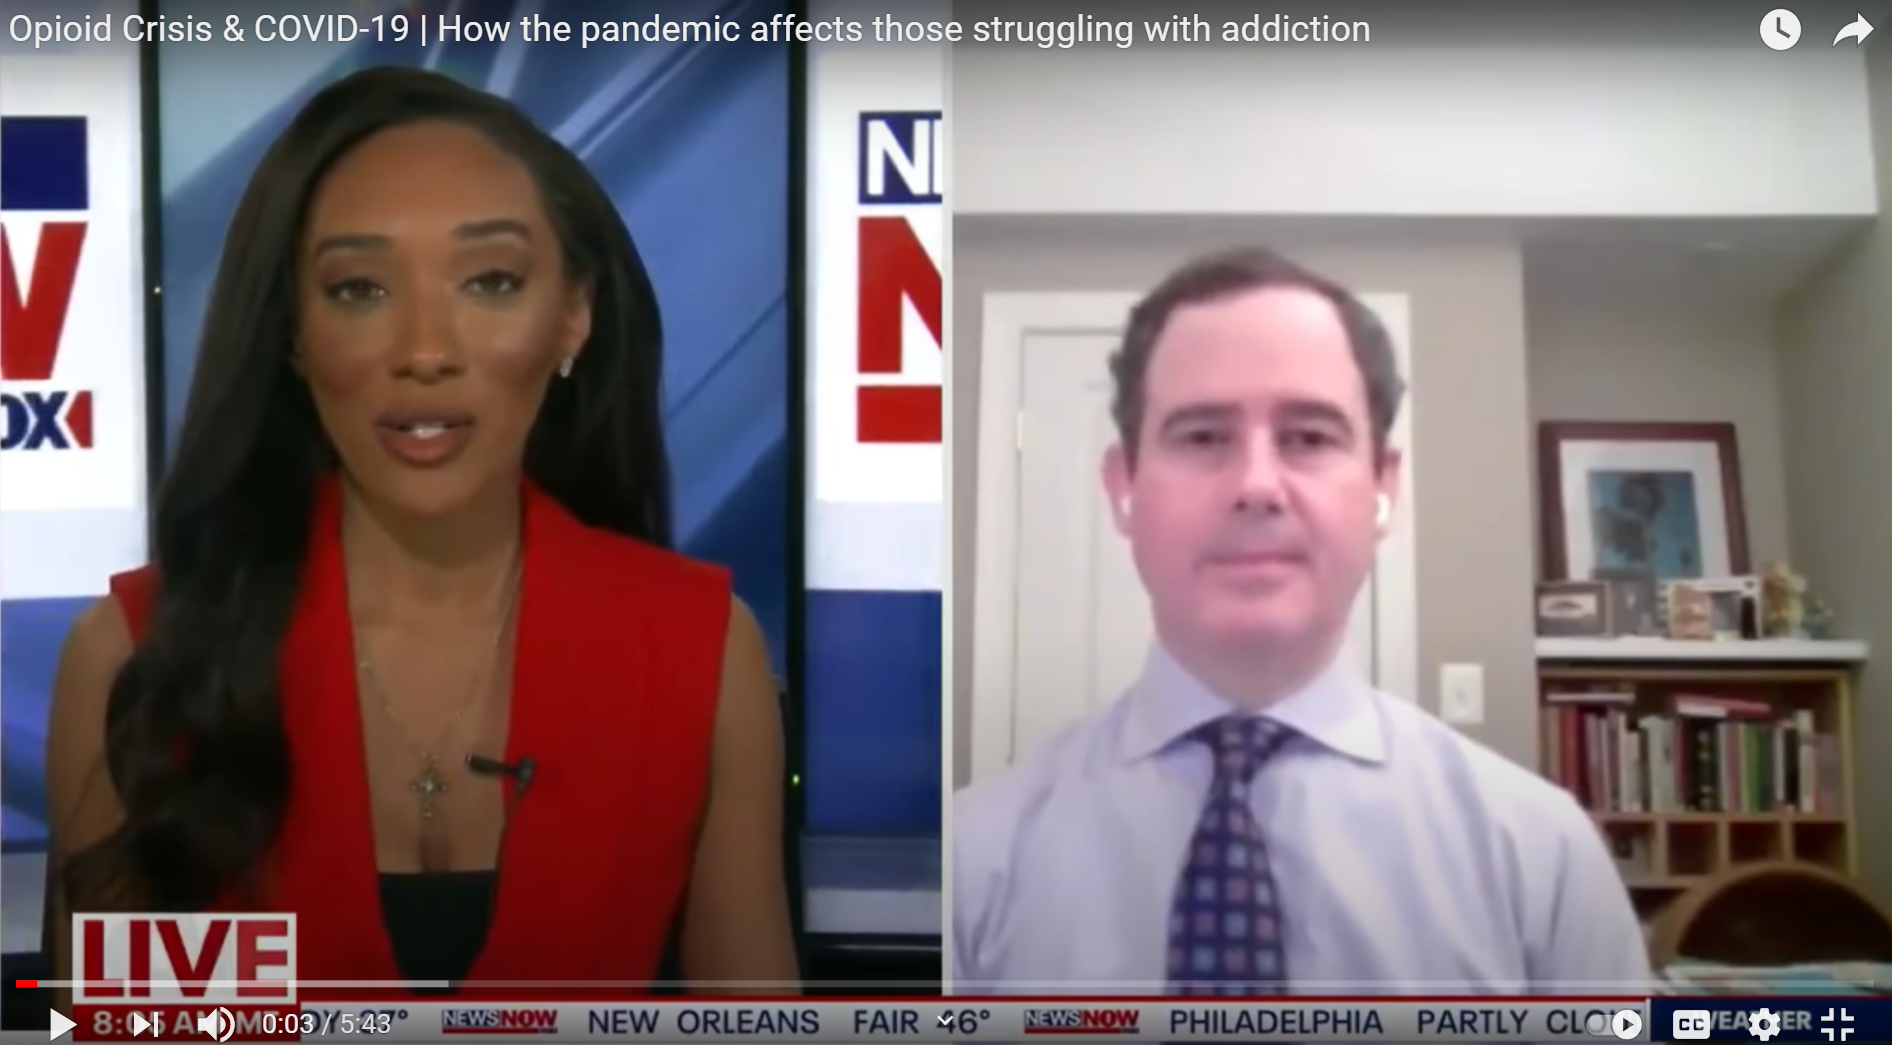 Opioid Crisis & COVID-19 | How the pandemic affects those struggling with addiction